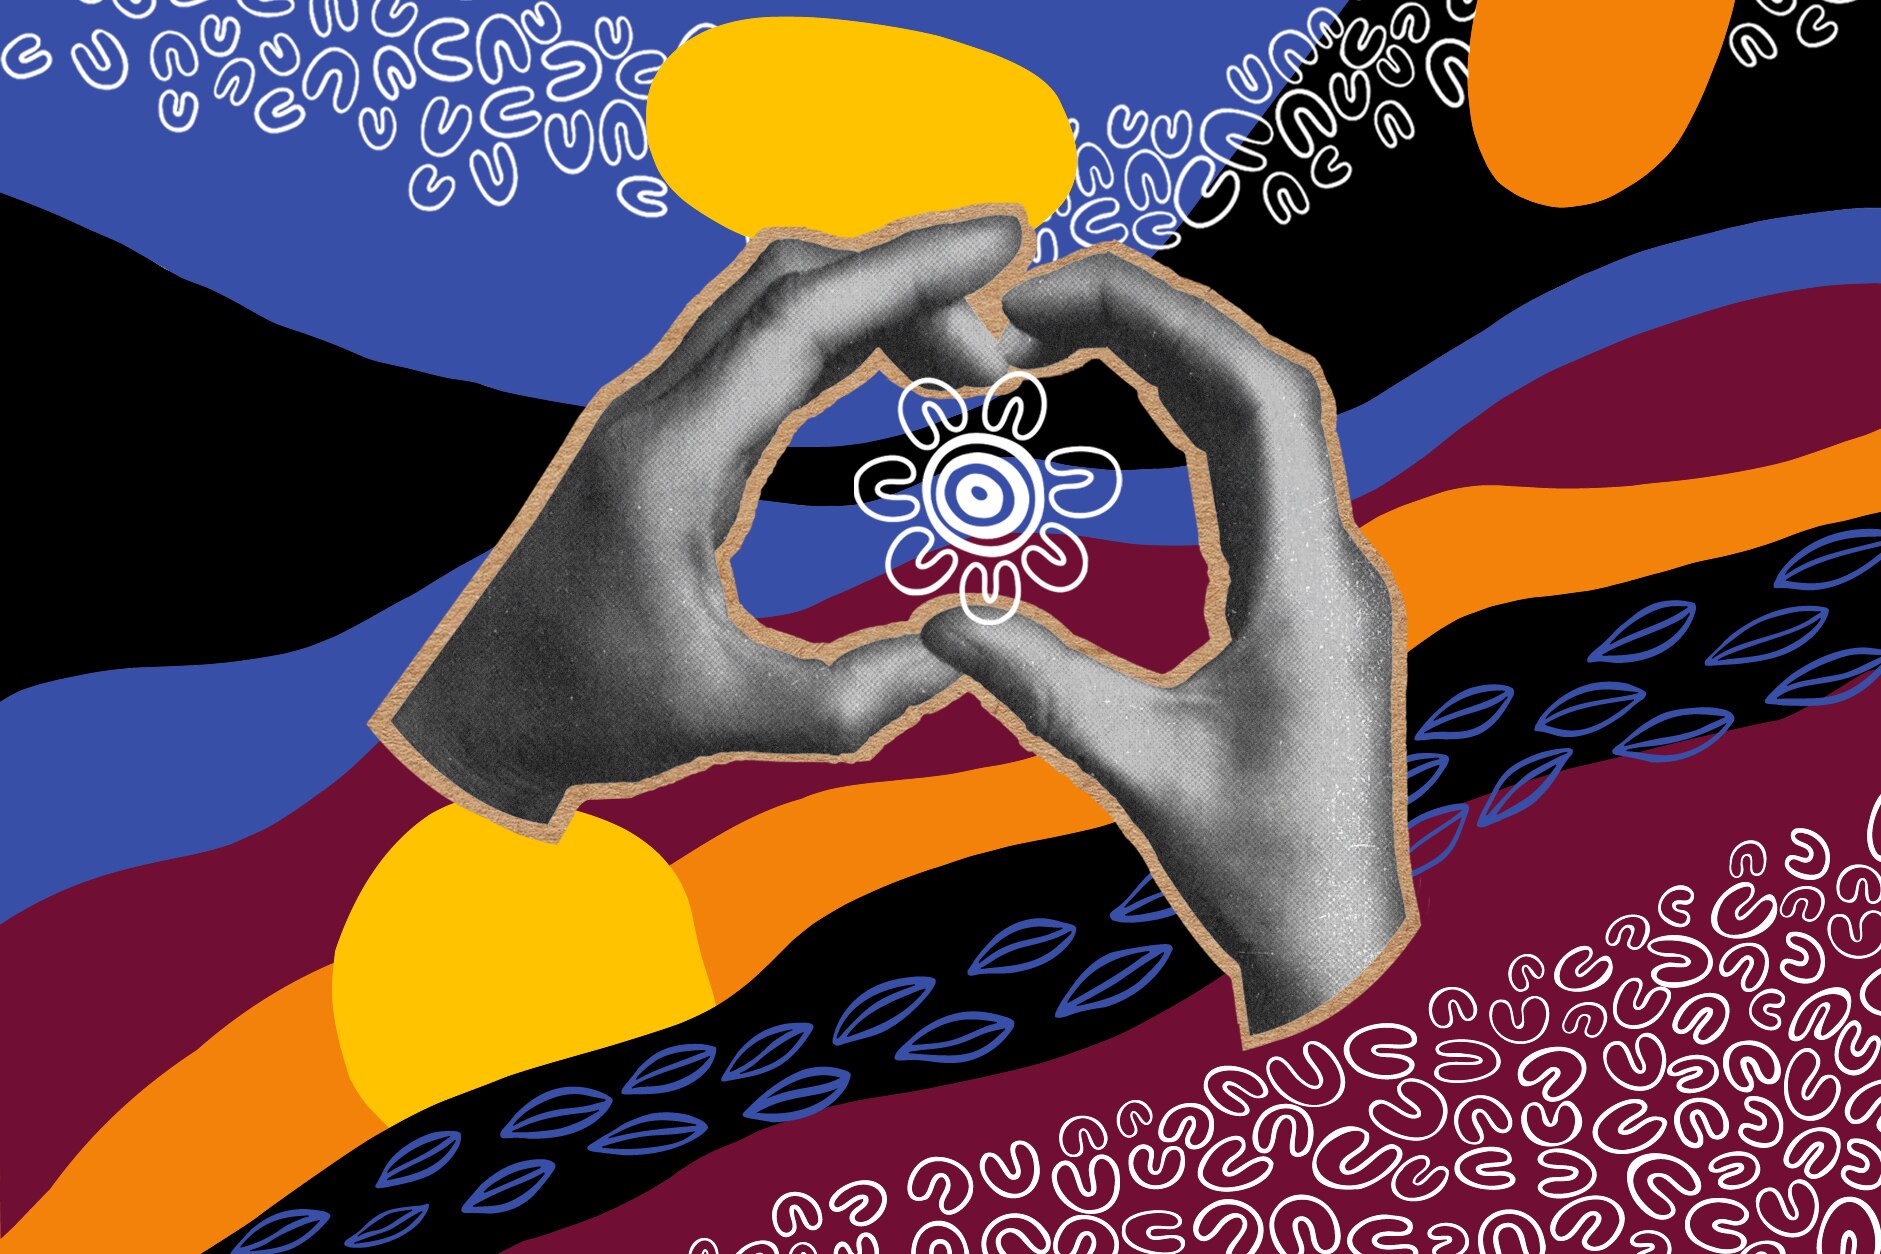 A cutout black and white photo of hands forming shape of Australia sit on top of colourful NAIDOC Week graphics.